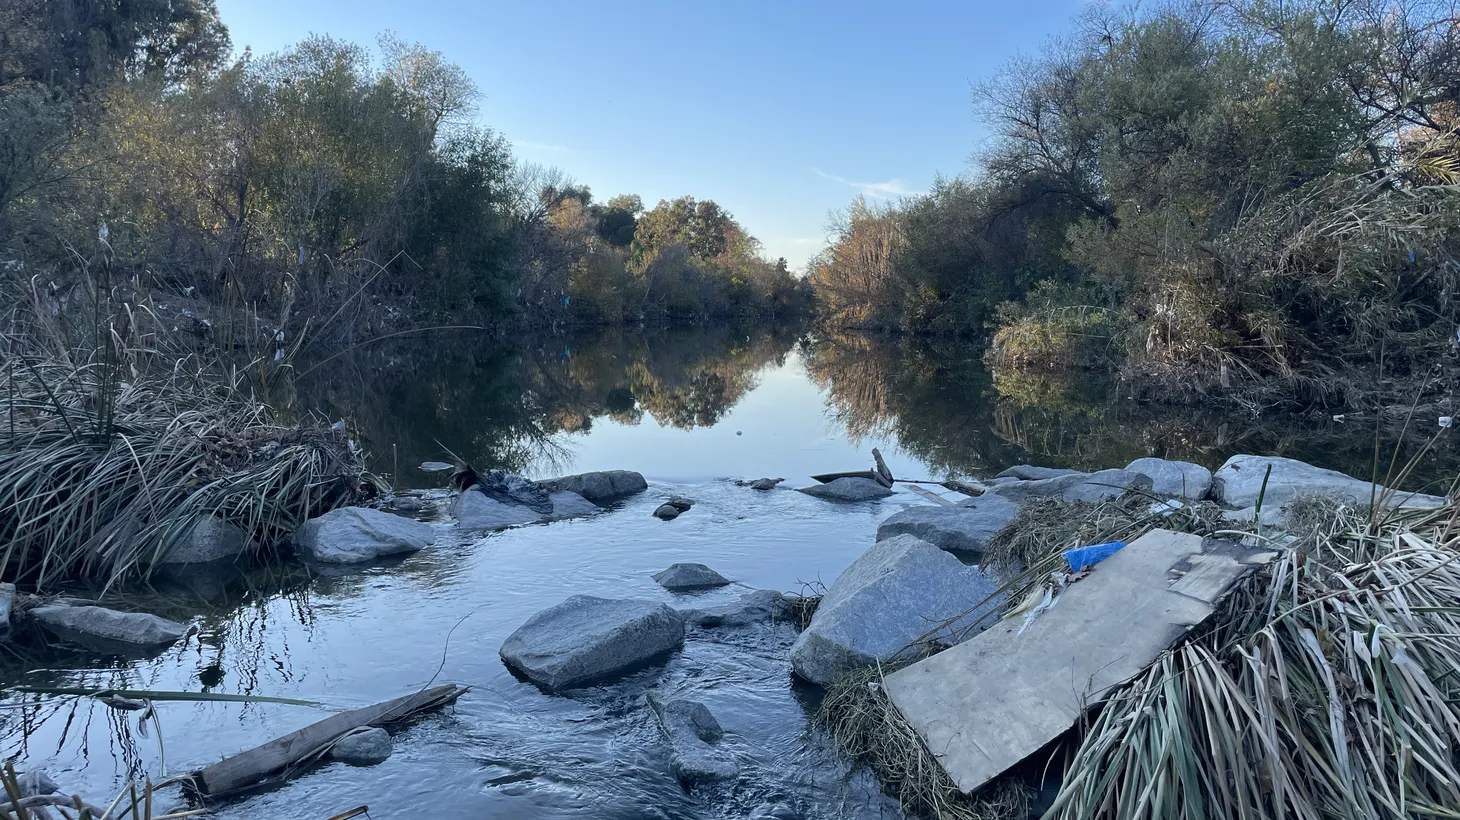 A section of a natural LA River inspires debate over whether more of the river could look this way.